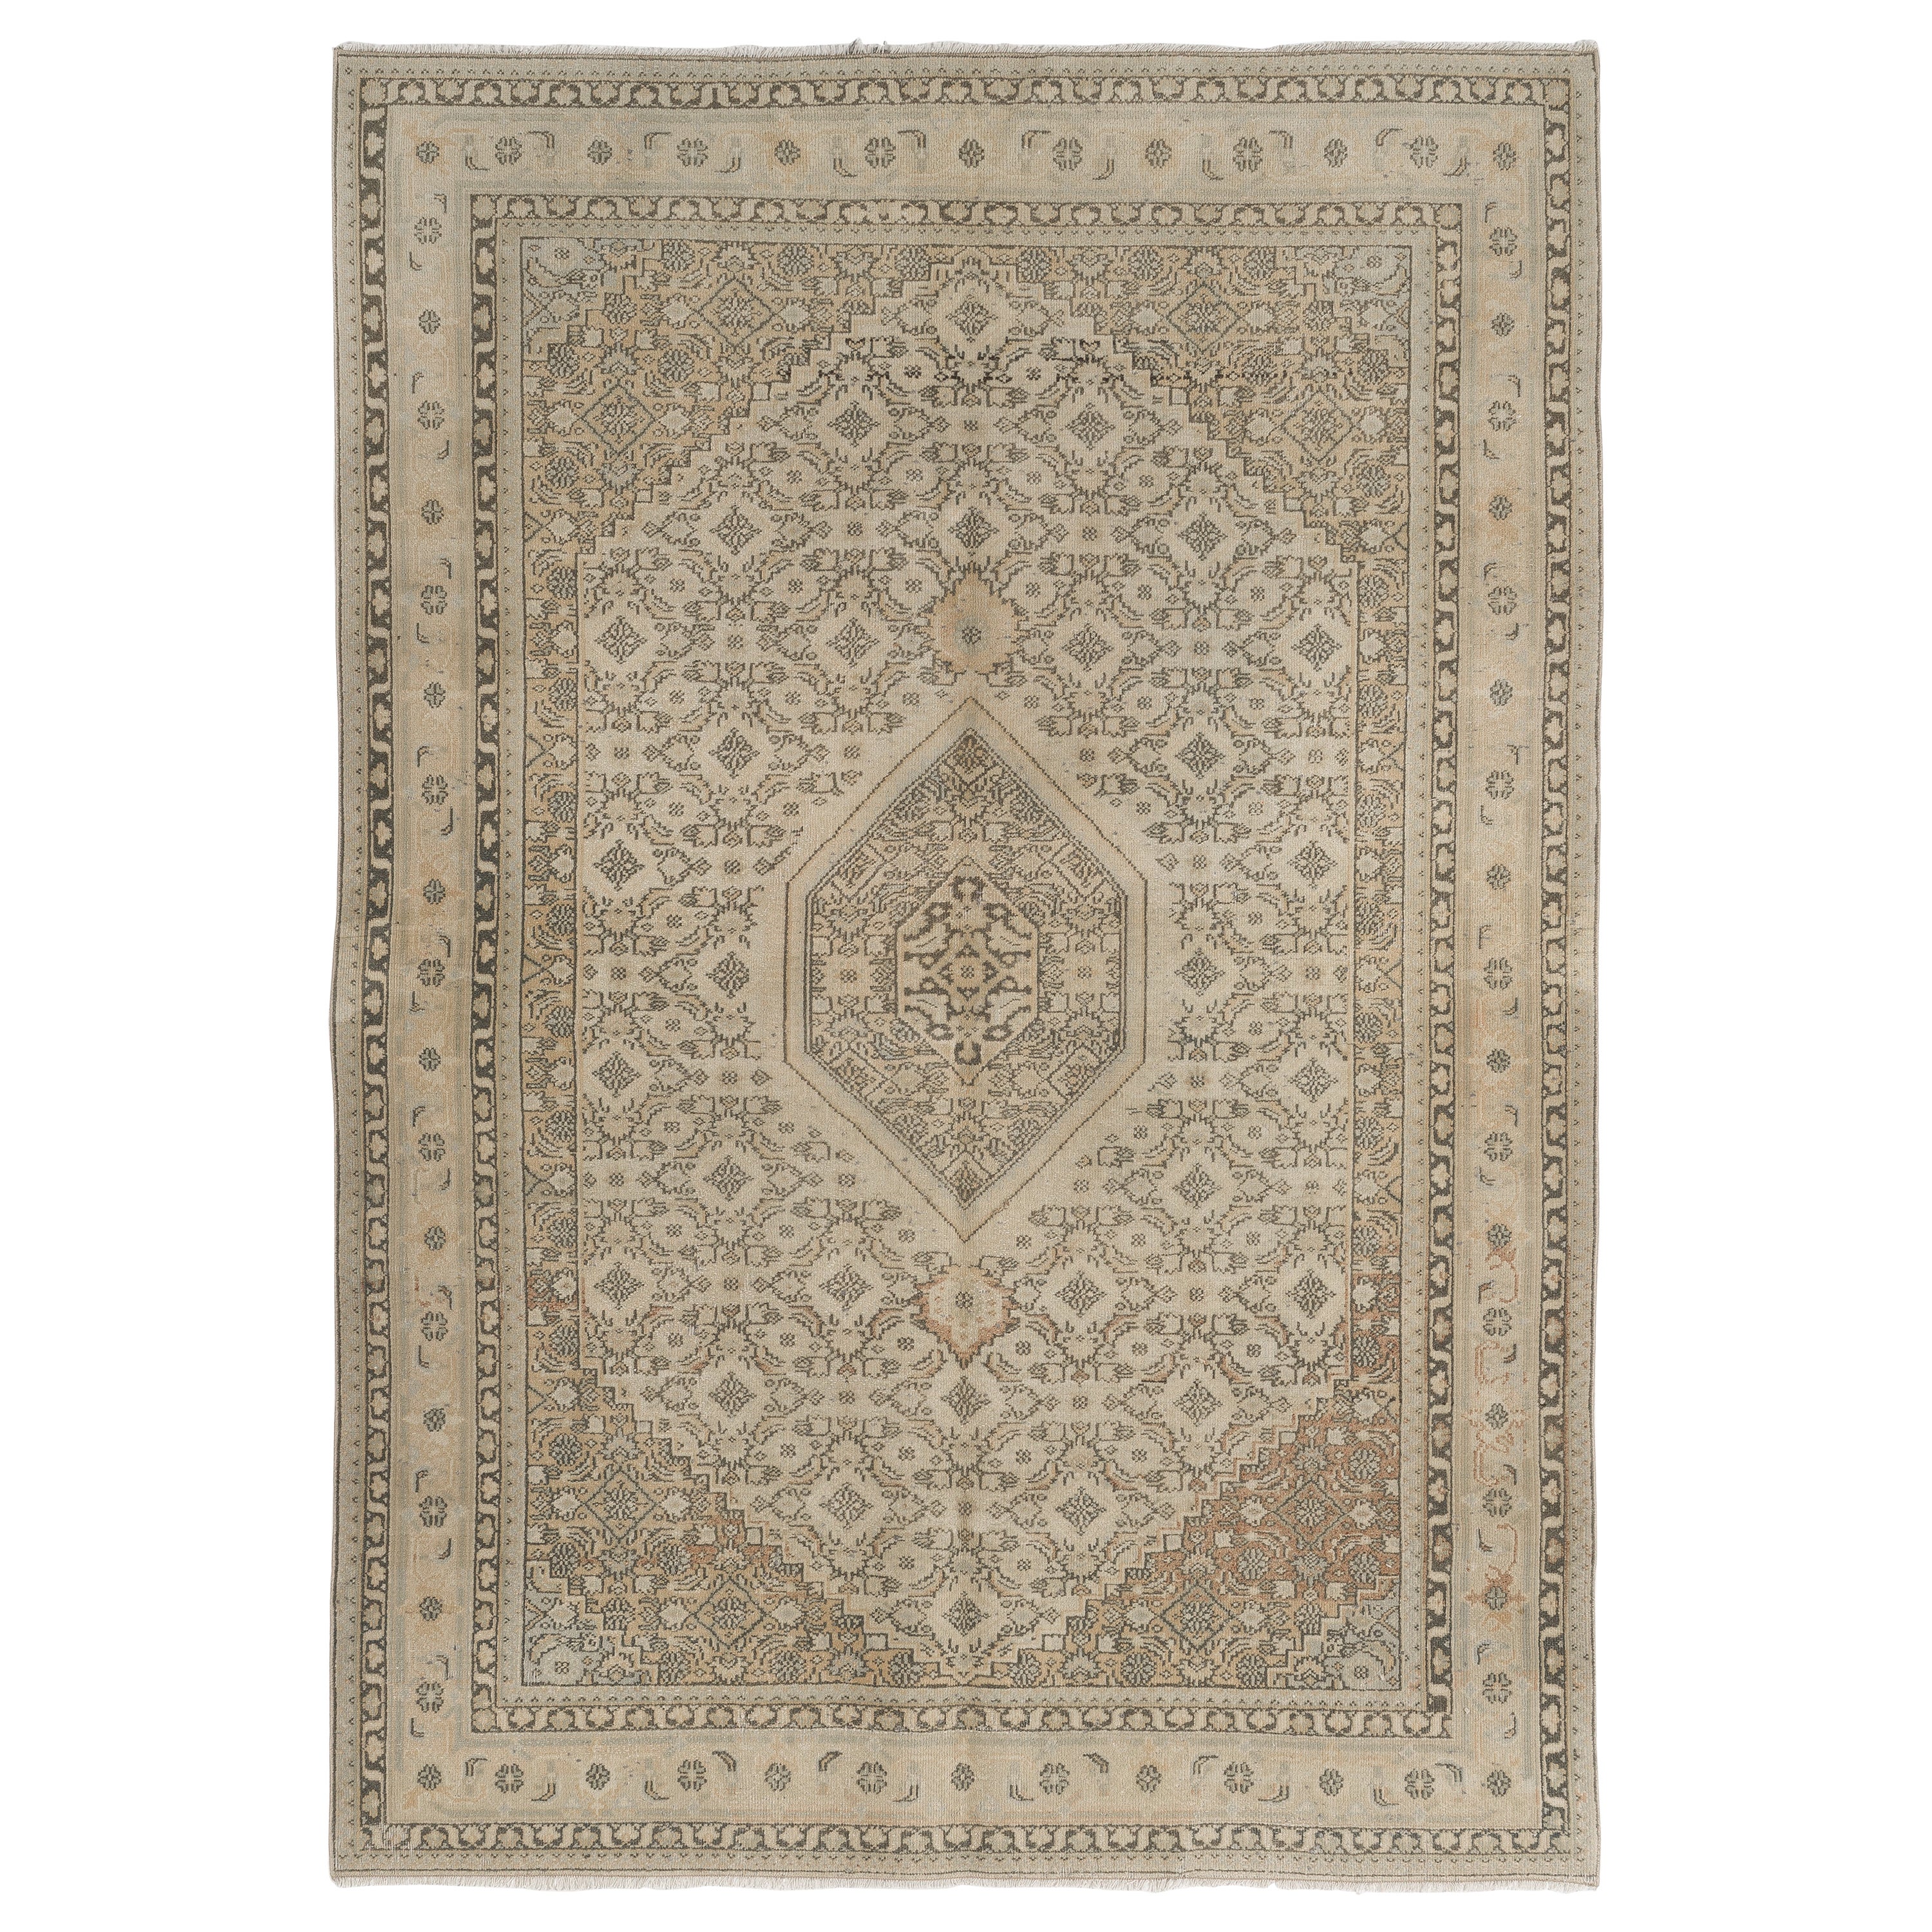 5.4x7.7 ft Hand Made Vintage Anatolian Oushak Wool Area Rug in Neutral Colors For Sale